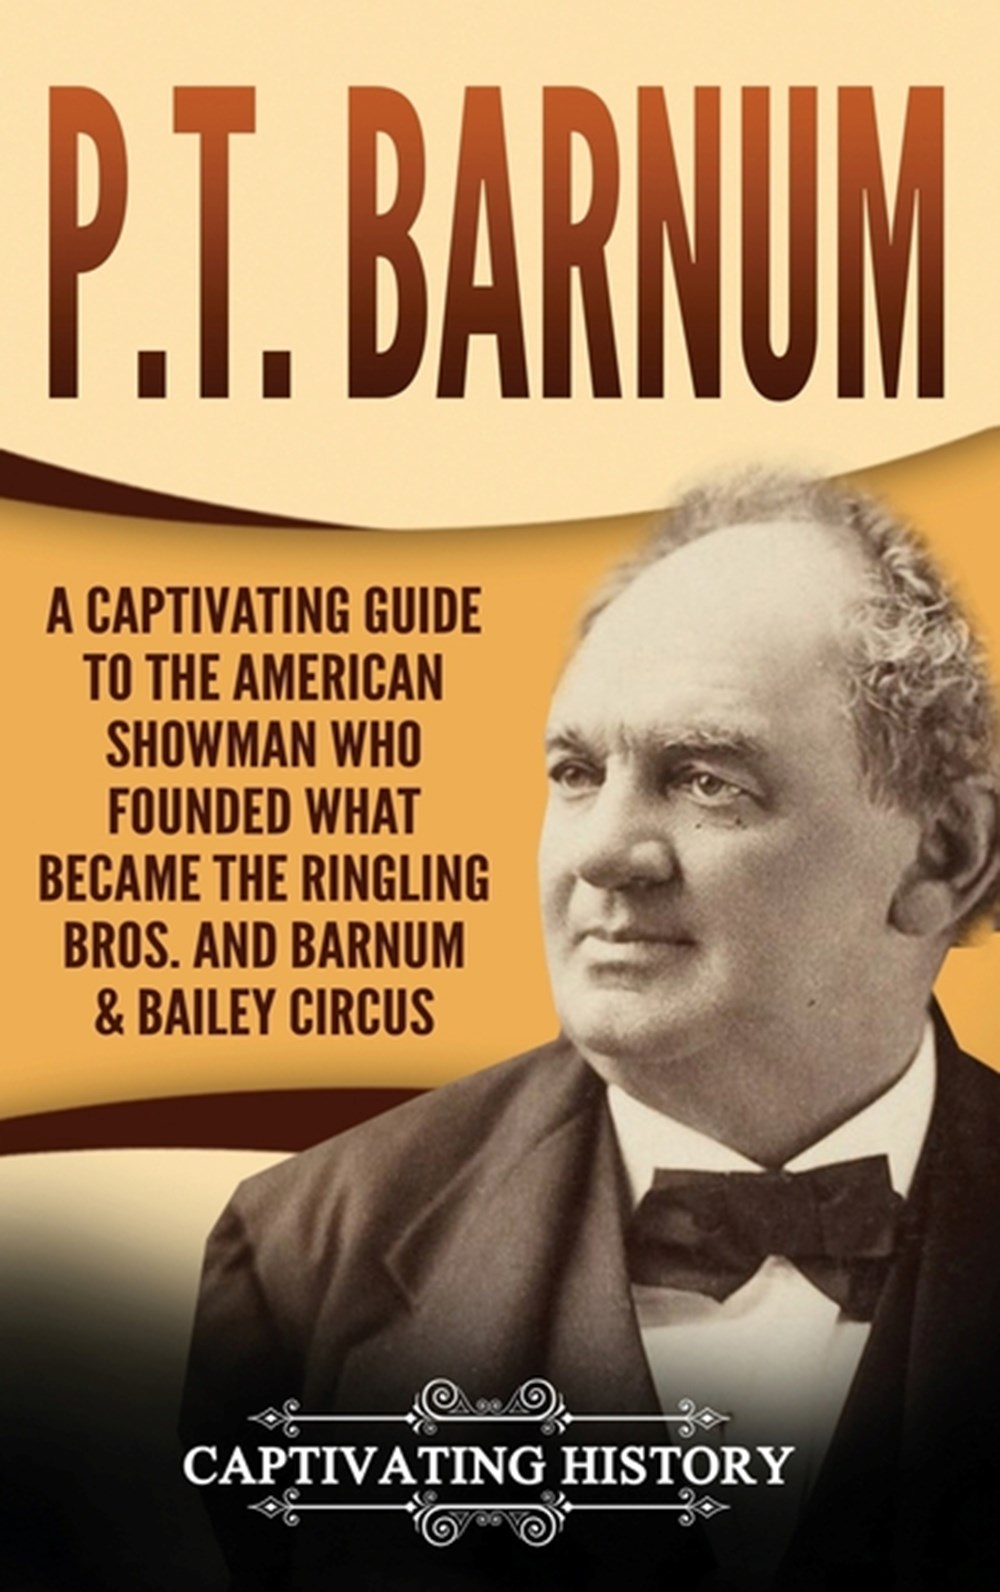 P.T. Barnum A Captivating Guide to the American Showman Who Founded What Became the Ringling Bros. a